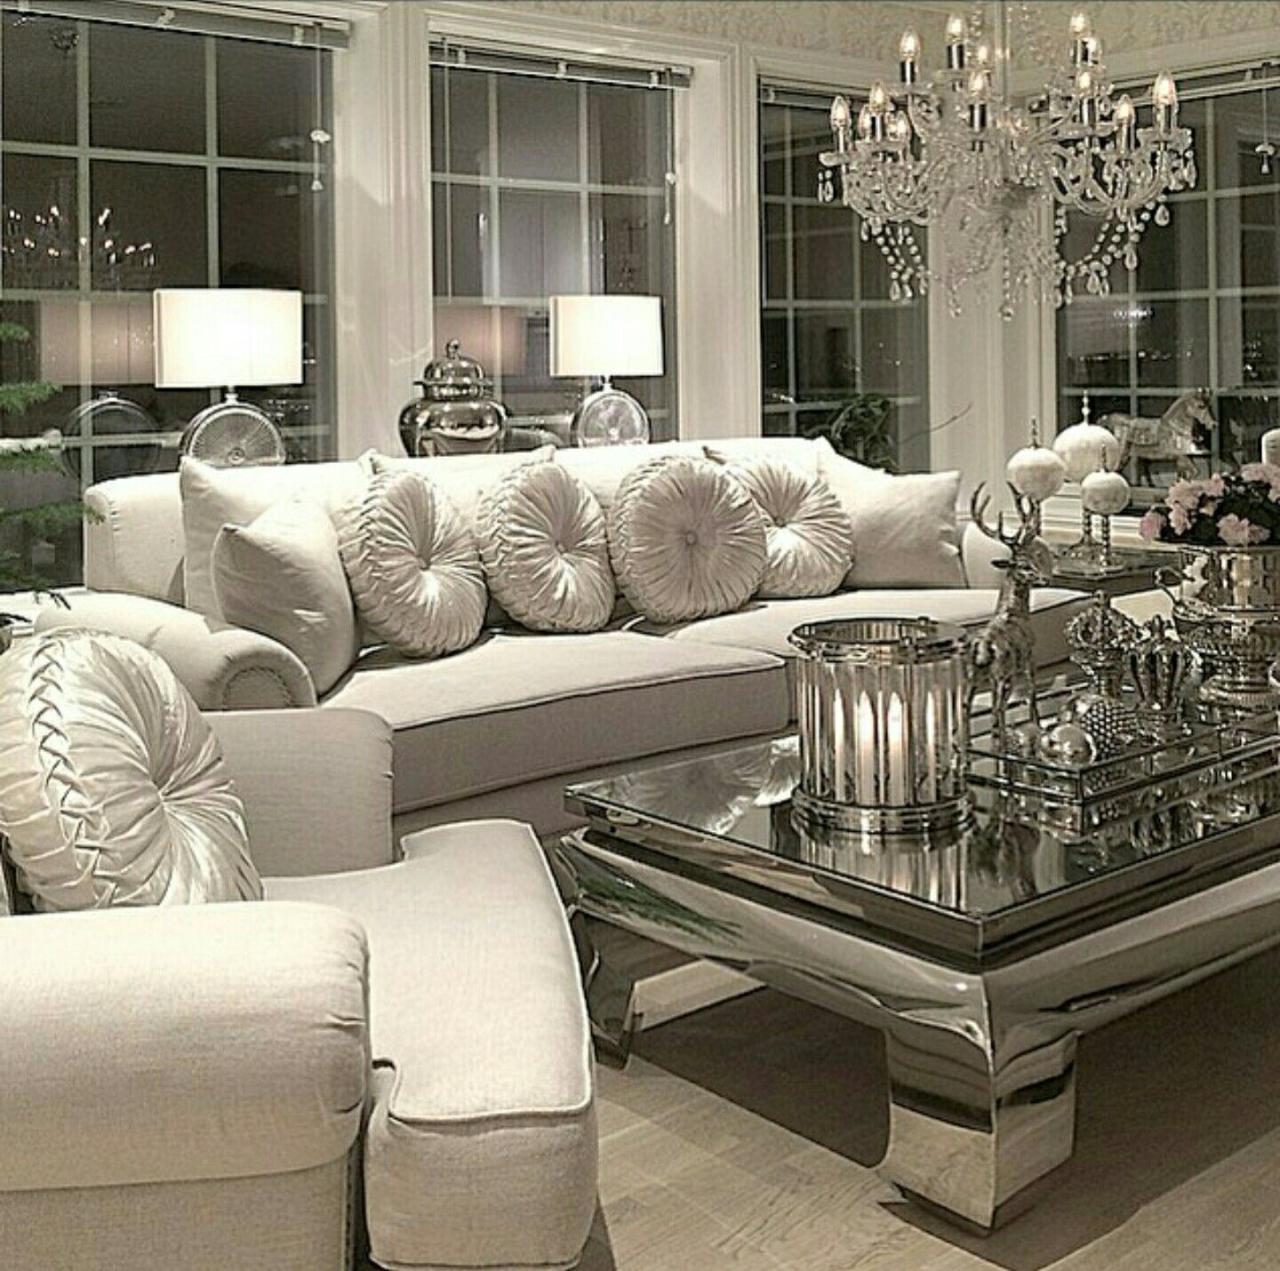 Glamorous Living Room Design Ideas for a Touch of Luxury